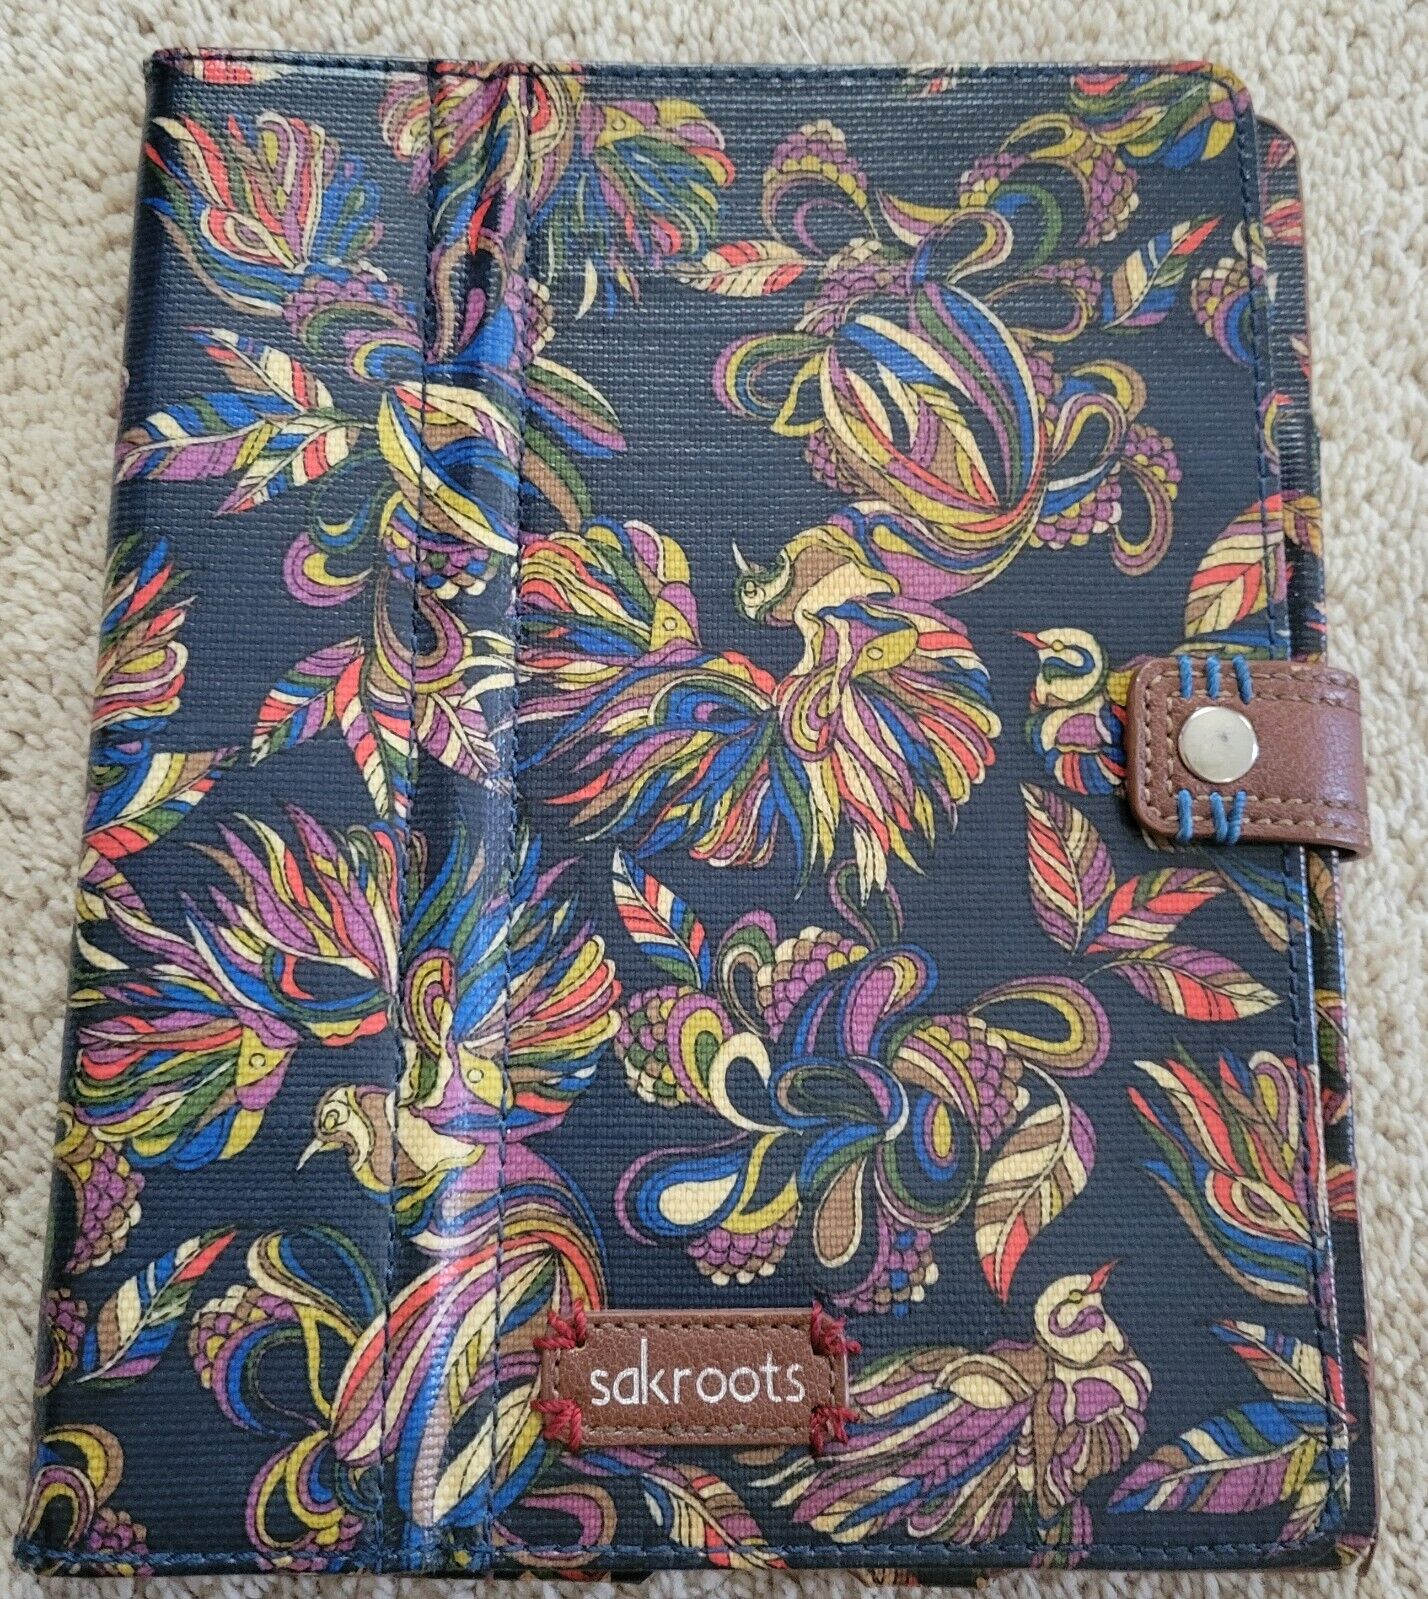 Sakroots Ipad/ Tablet Cover Case navy blue paisley/floral print